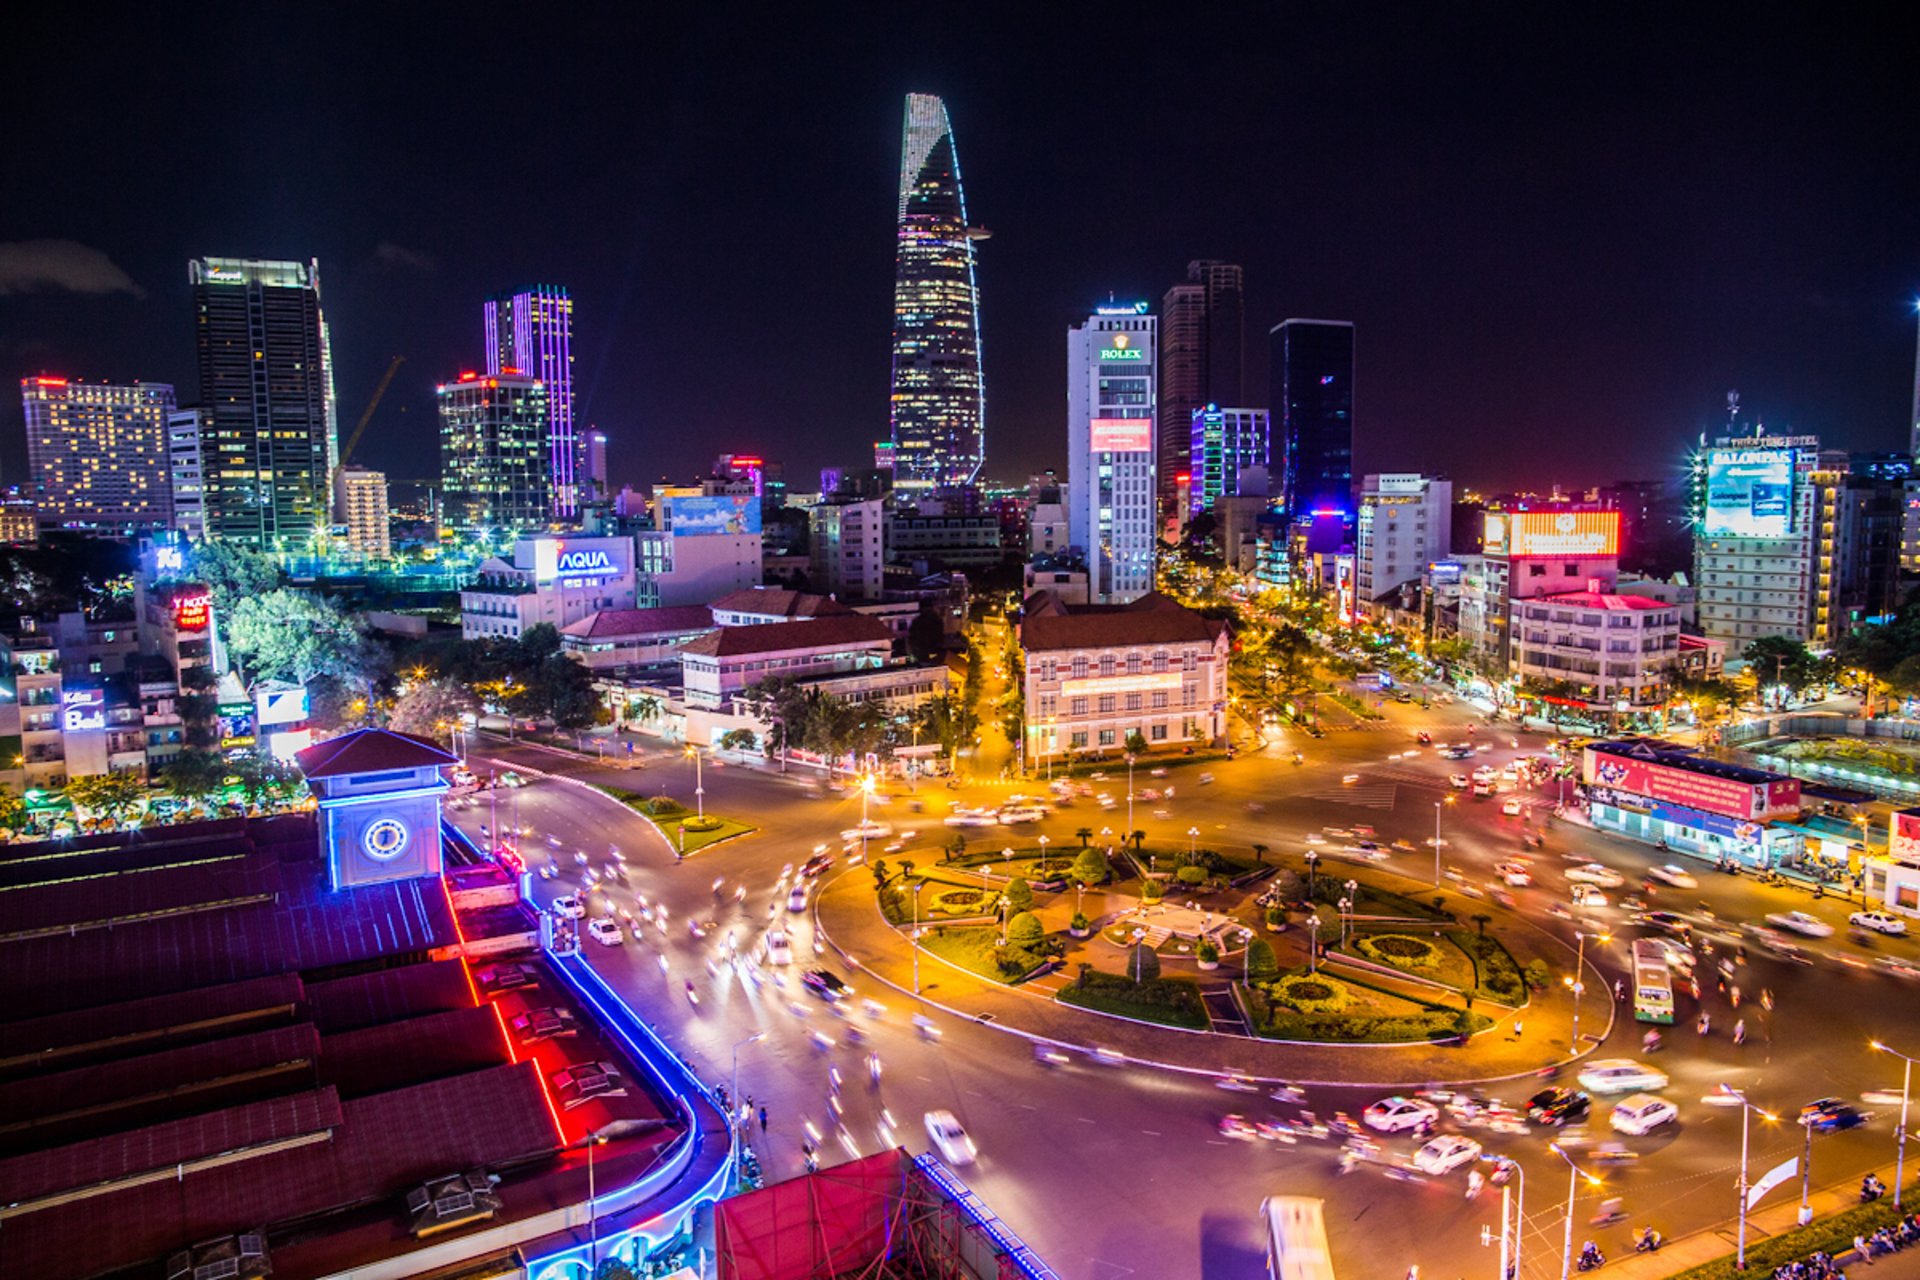 7 must-see attractions in HCMC